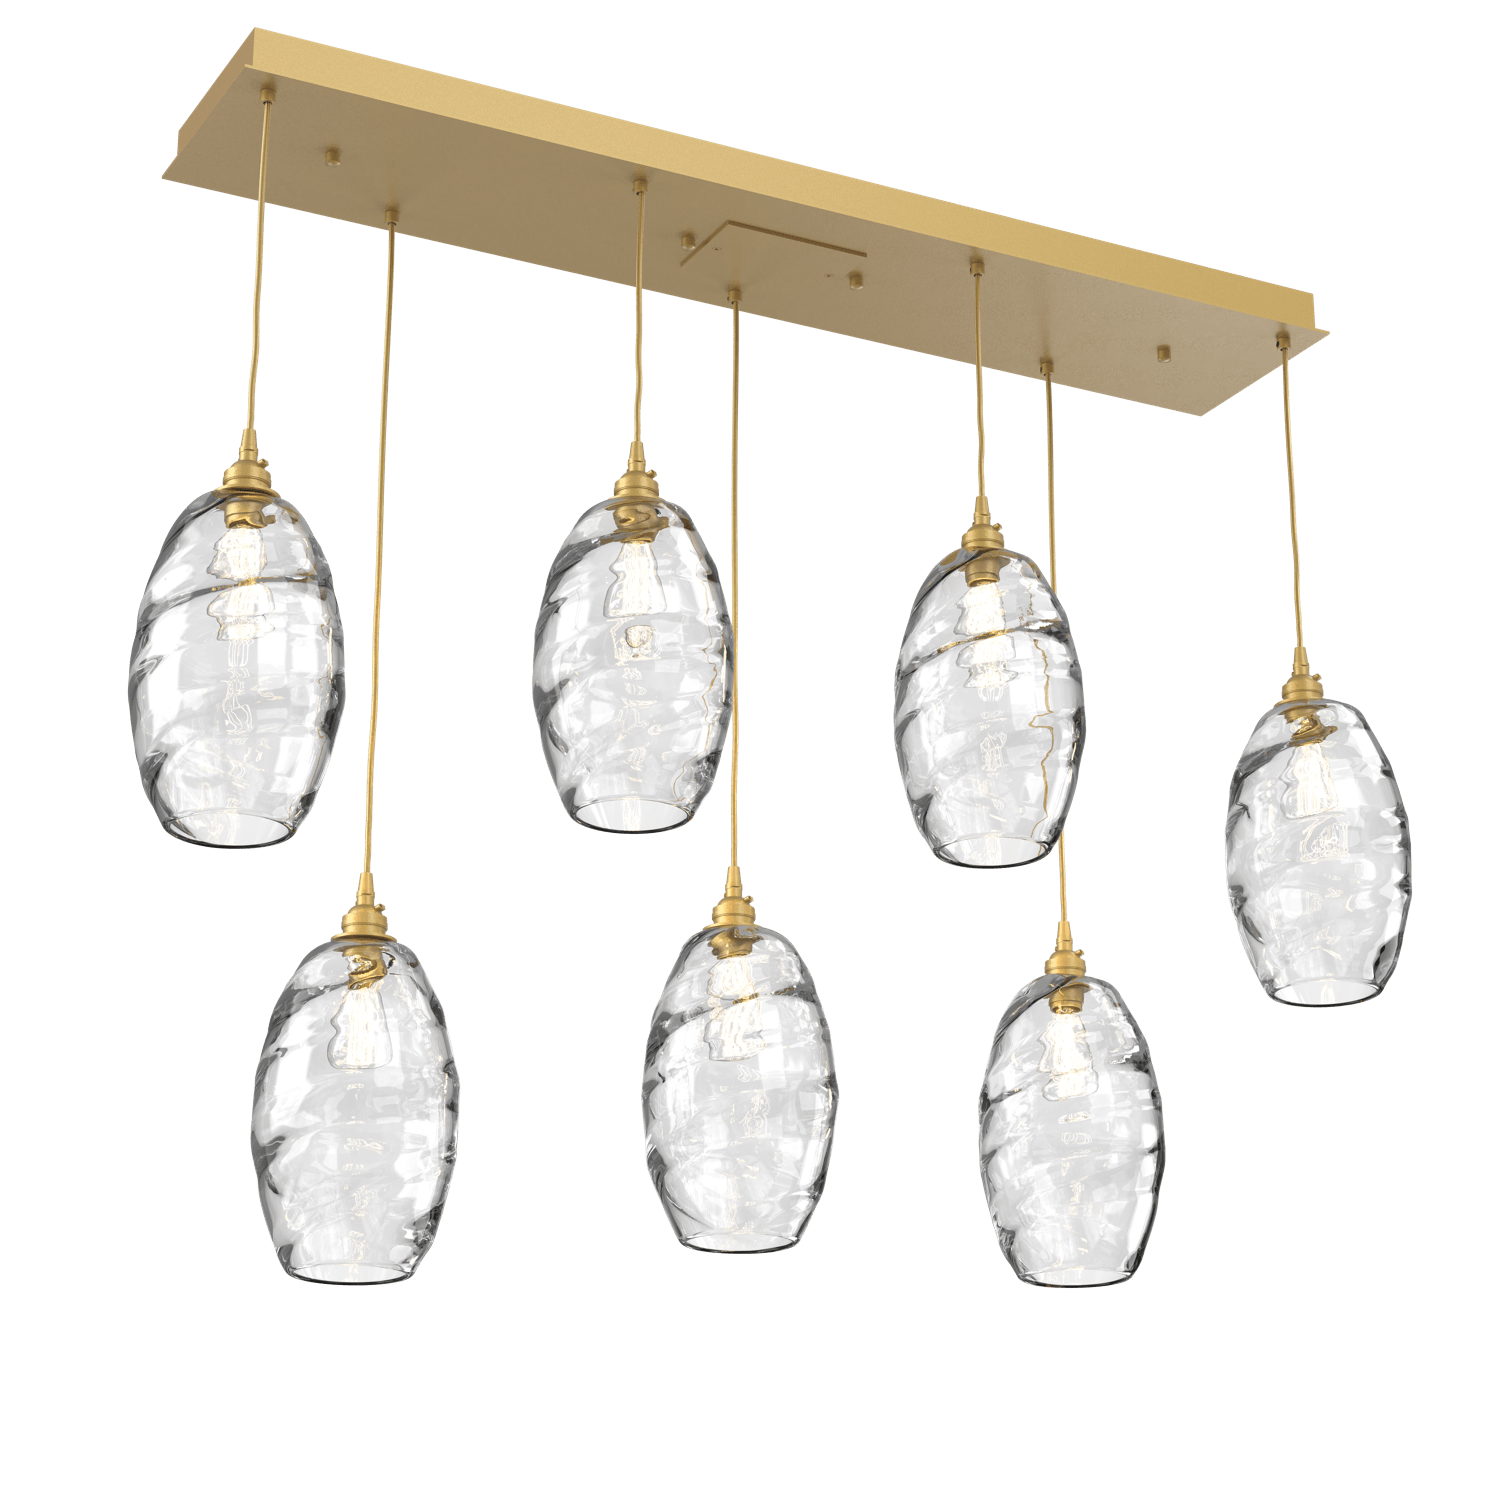 PLB0035-07-GB-OC-Hammerton-Studio-Optic-Blown-Glass-Elisse-7-light-linear-pendant-chandelier-with-gilded-brass-finish-and-optic-clear-blown-glass-shades-and-incandescent-lamping